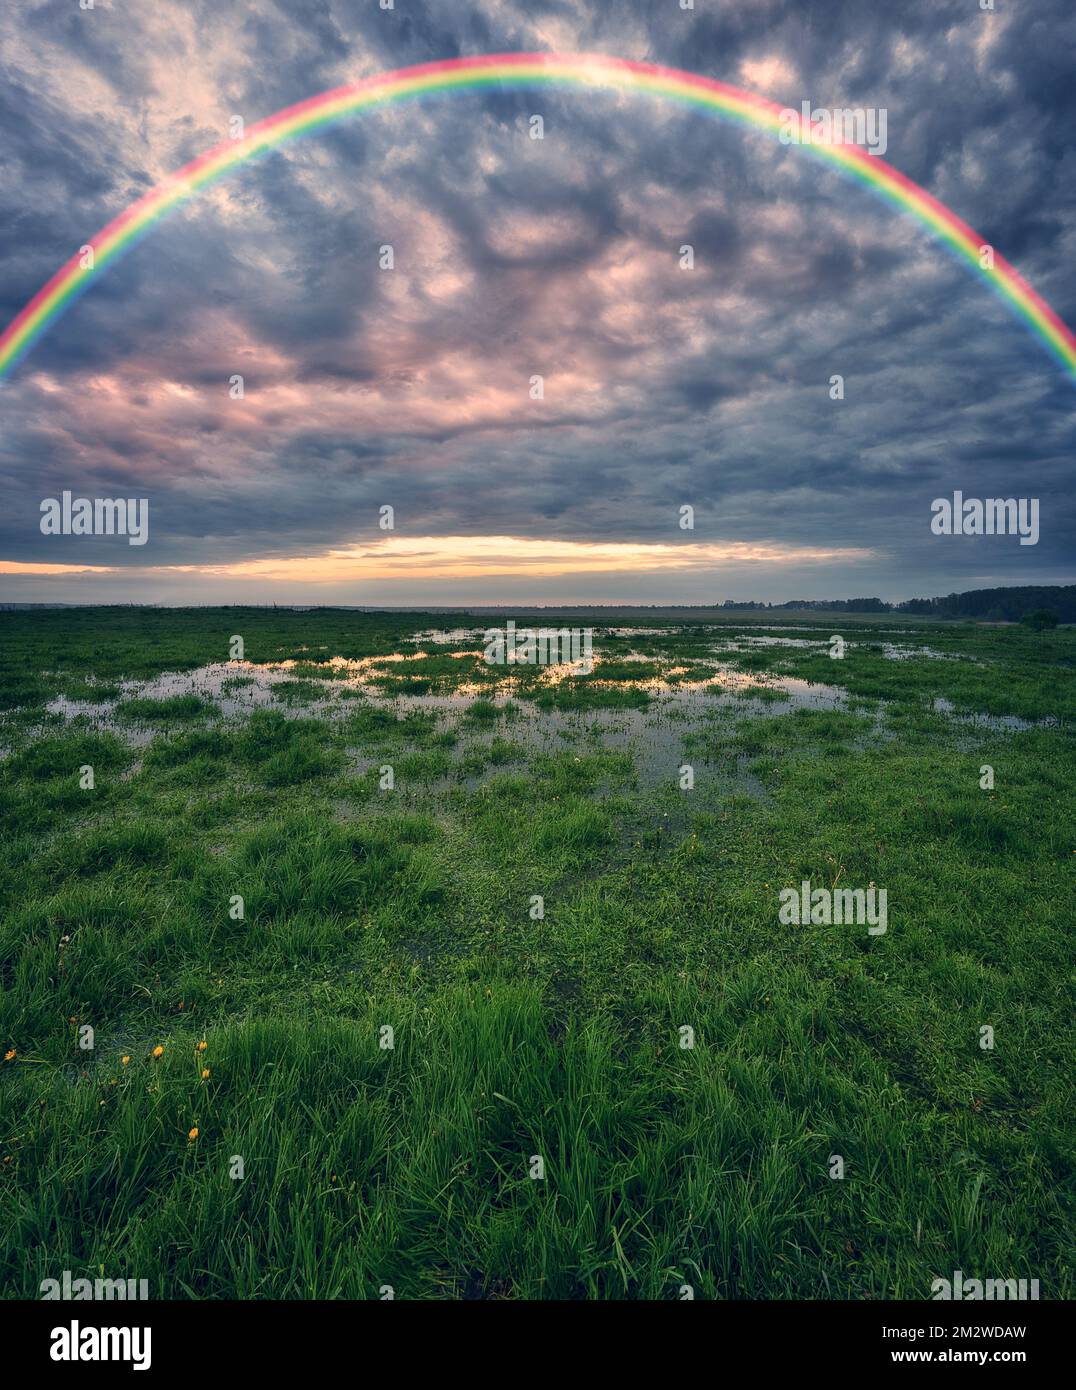 Landscape with a Rainbow on the River in Spring. colorful morning. nature of Ukraine Stock Photo